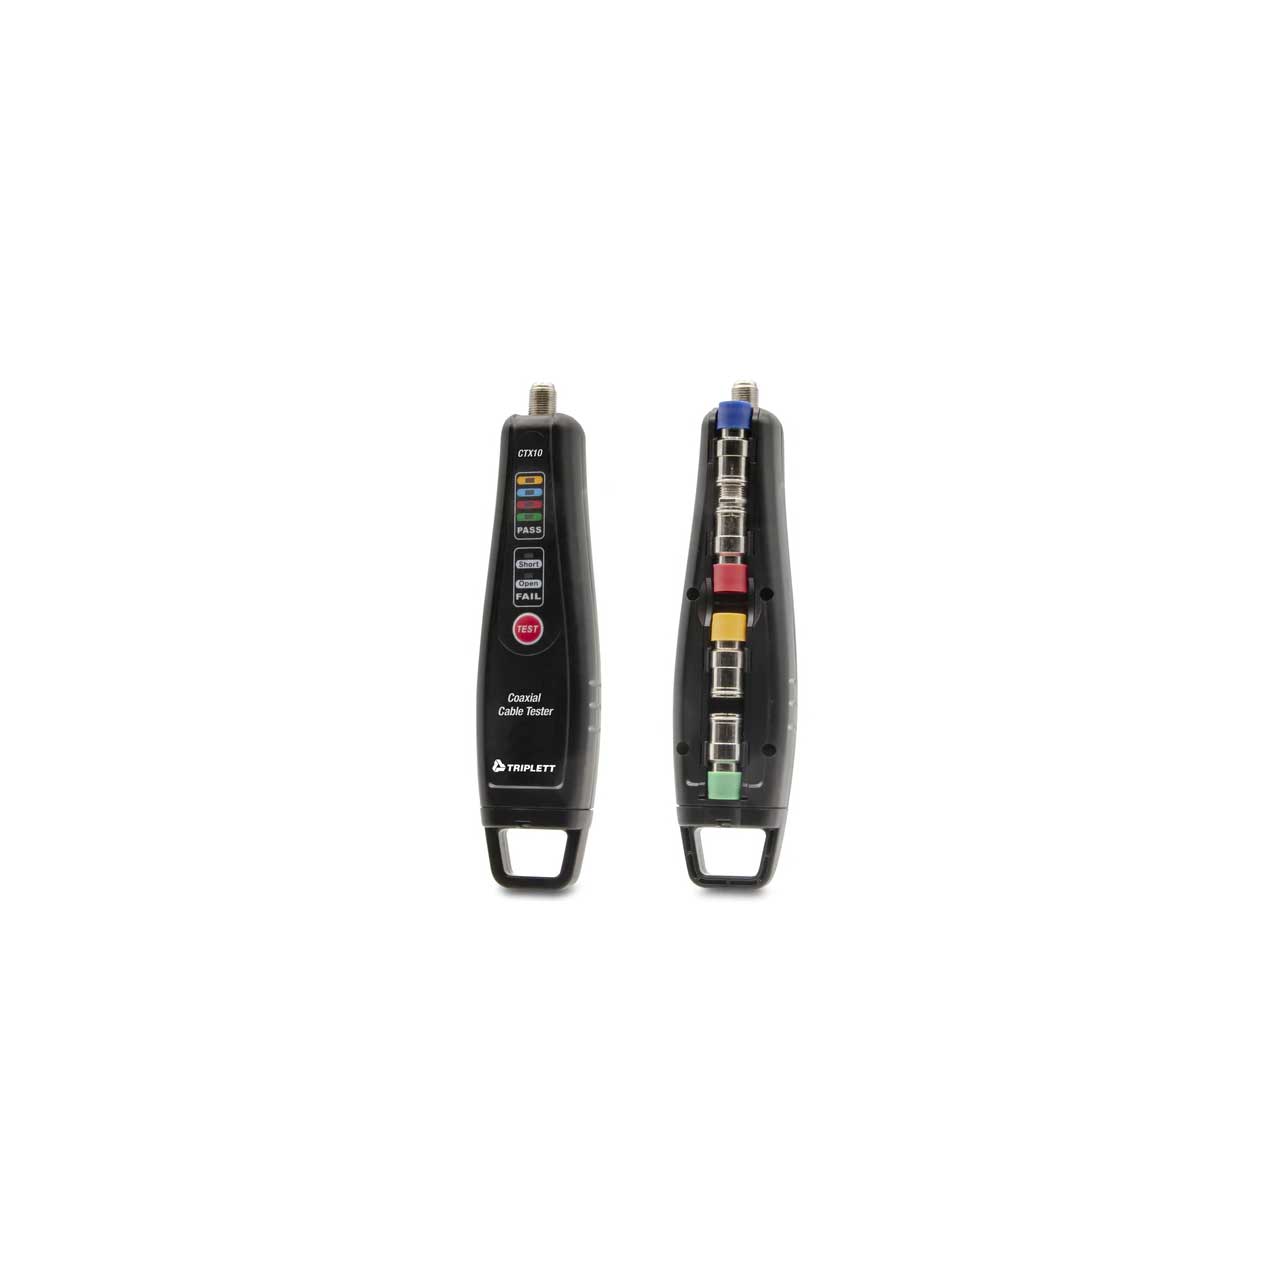 Triplett CTX10 Coaxial Cable Tester for CAT5/6 Coaxial Cables with Tone Generator and Coax Remote CTX10